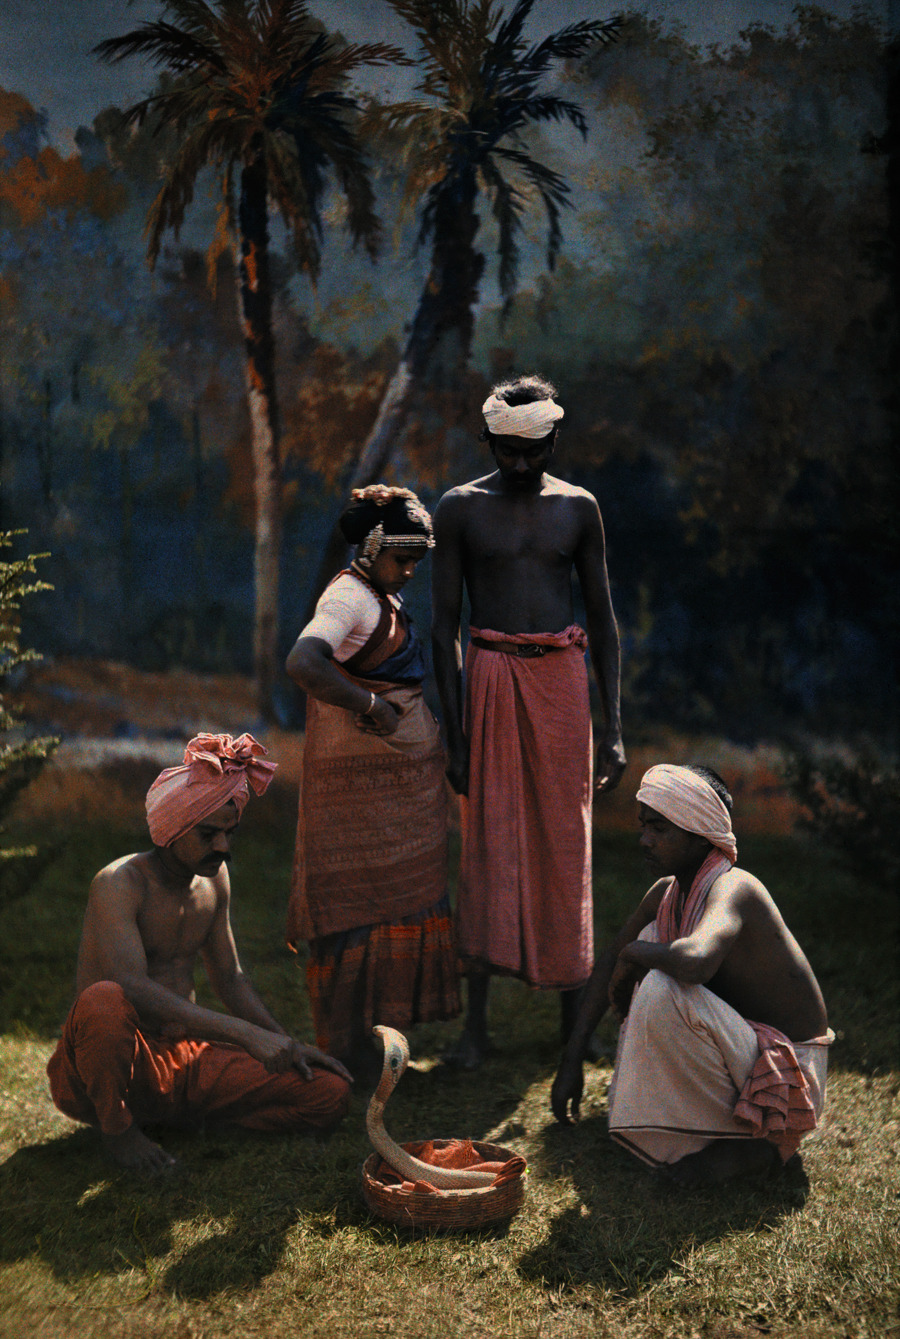 A group of people gather round and watch a snake charmer at work in India, 1923.Photograph by Hans Hildenbrand, National Geographic